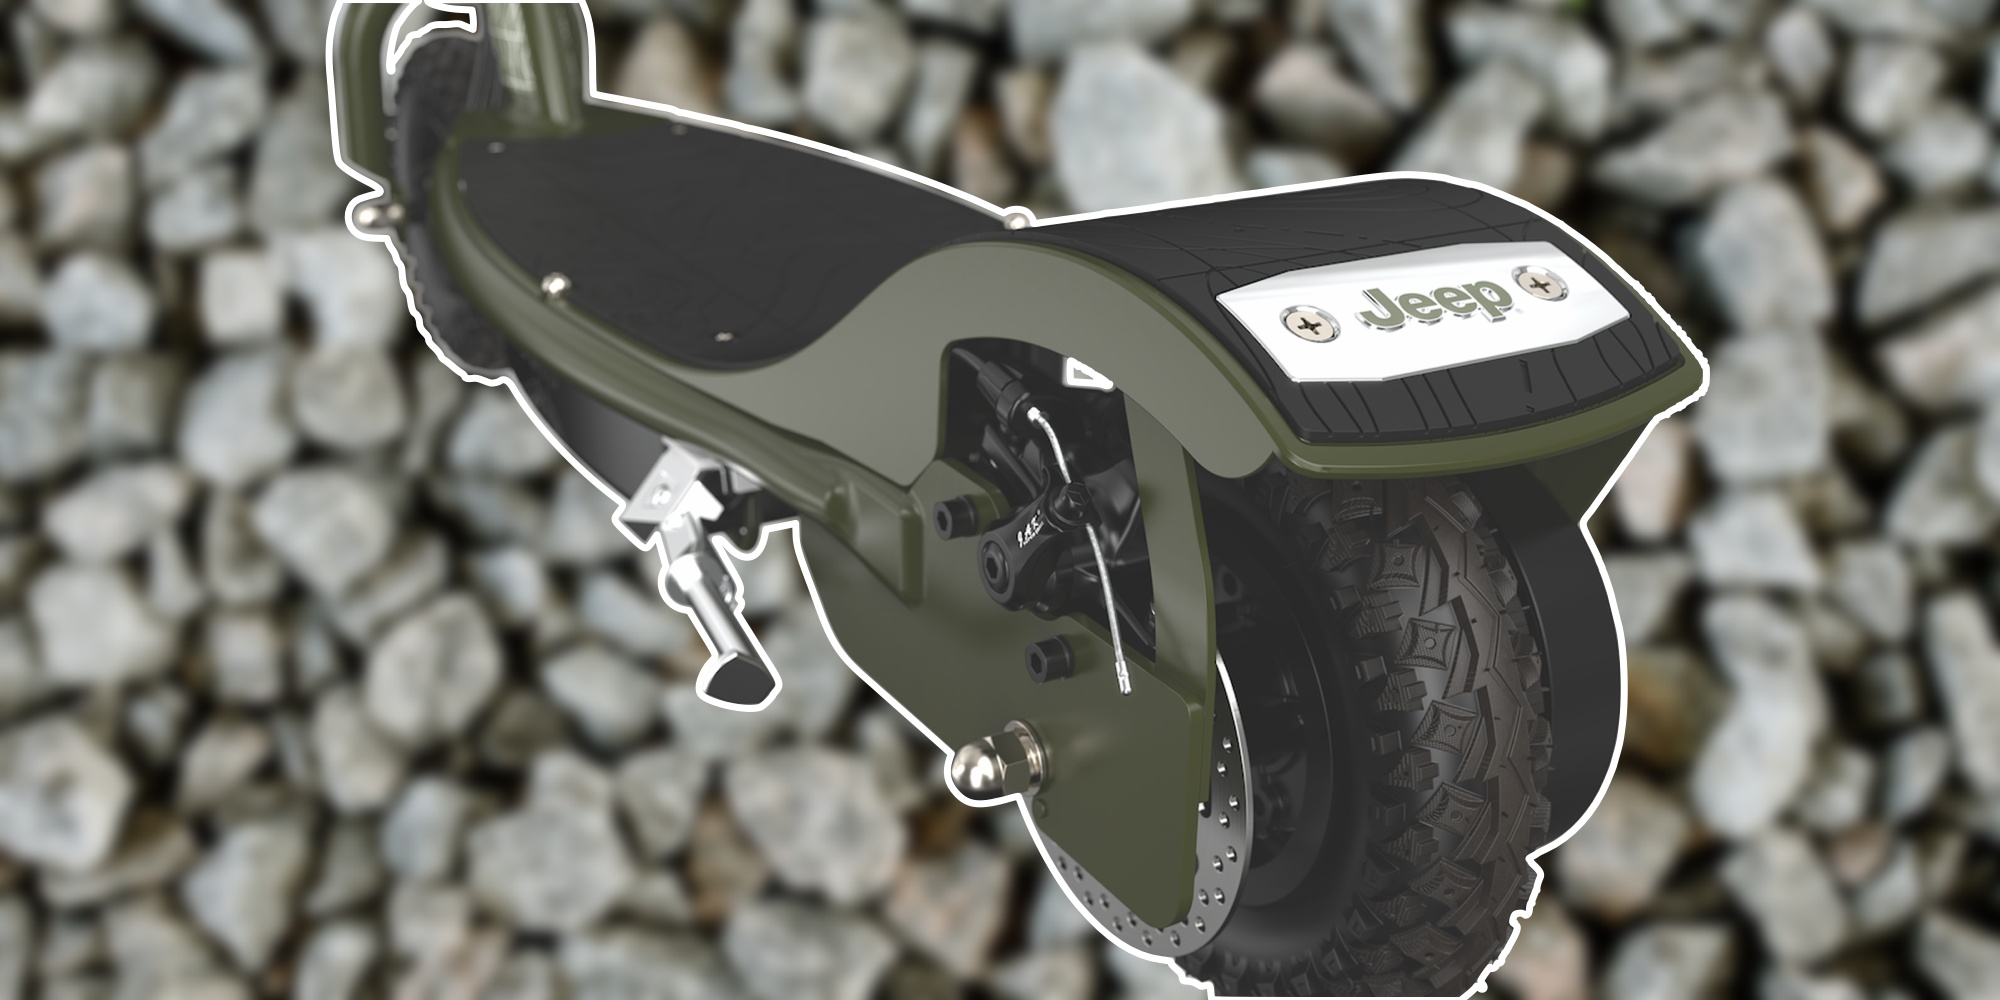 Jeep electric scooter unveiled for off-road riding, but don't get